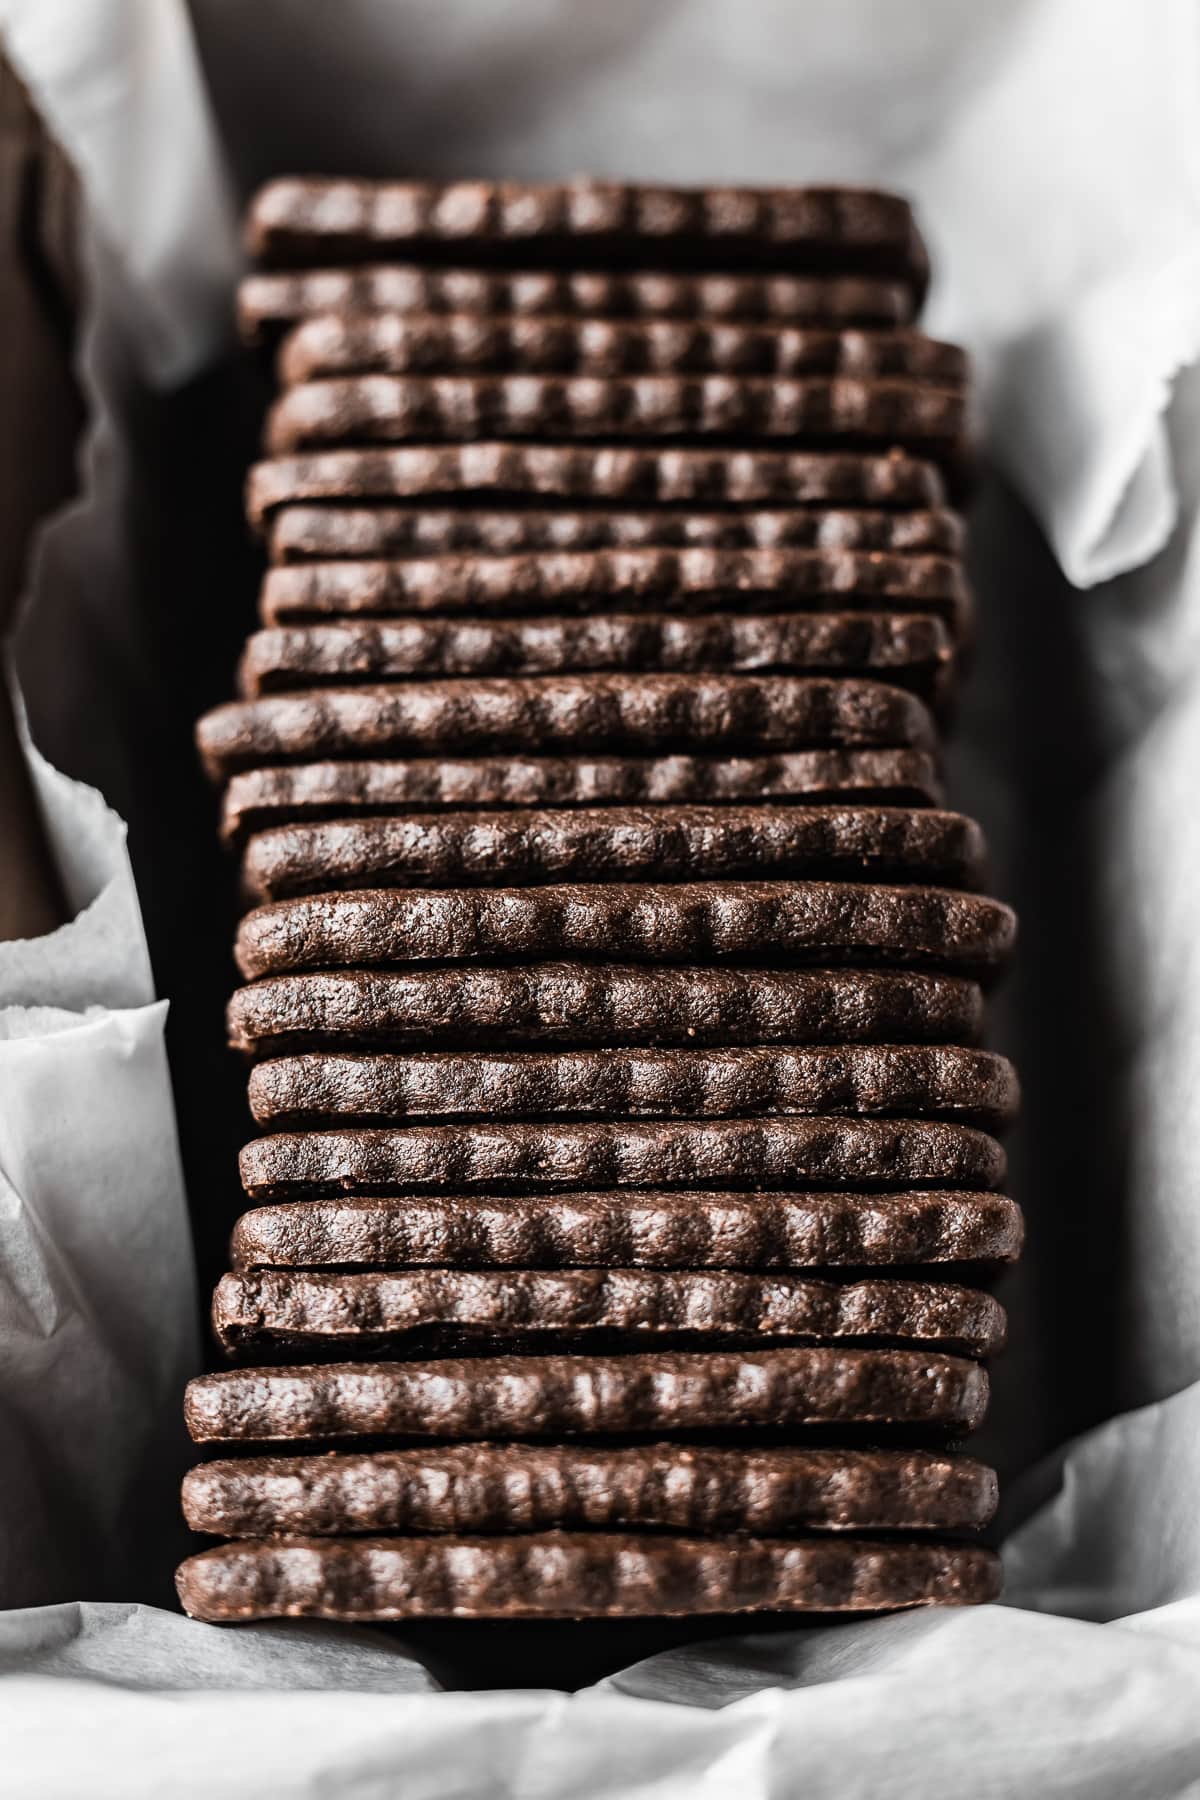 A top view of a row of chocolate wafer cookies in a white parchment paper lined container.